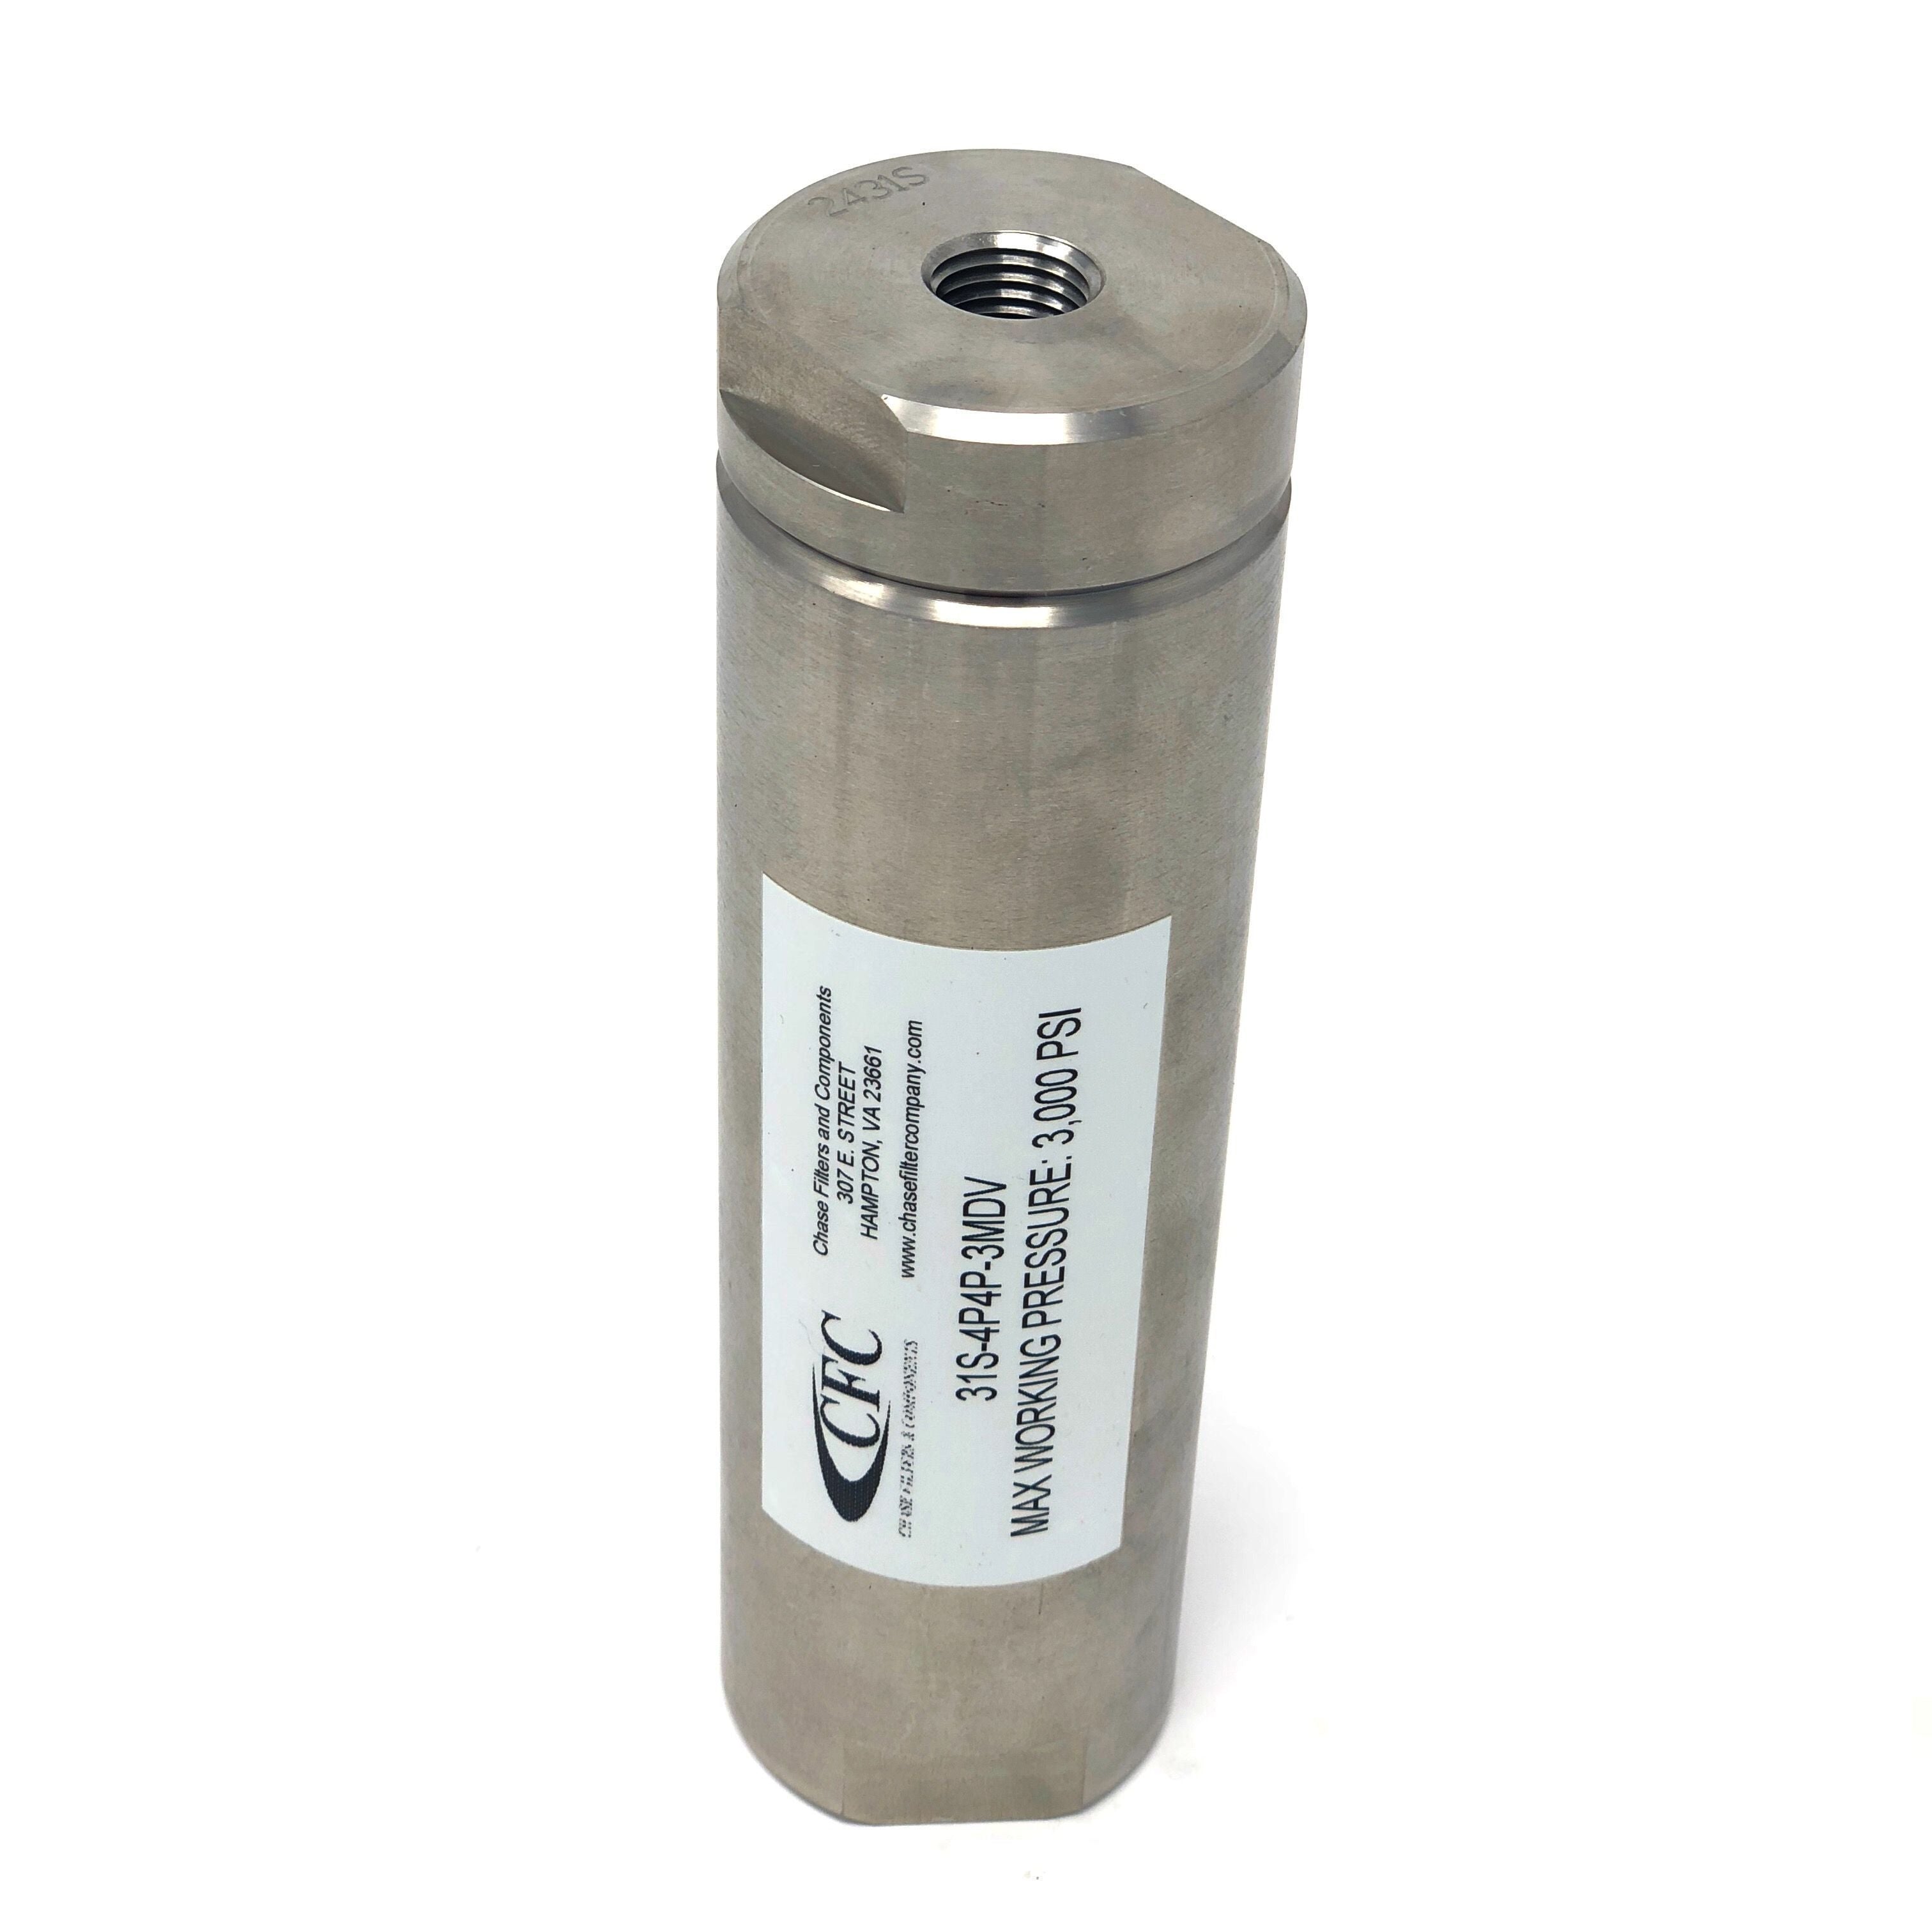 31S-6S6S-10SN : Chase High Pressure Inline Filter, 3000psi, #6 SAE (3/8") , 10 Micron, No Visual Indicator, No Bypass